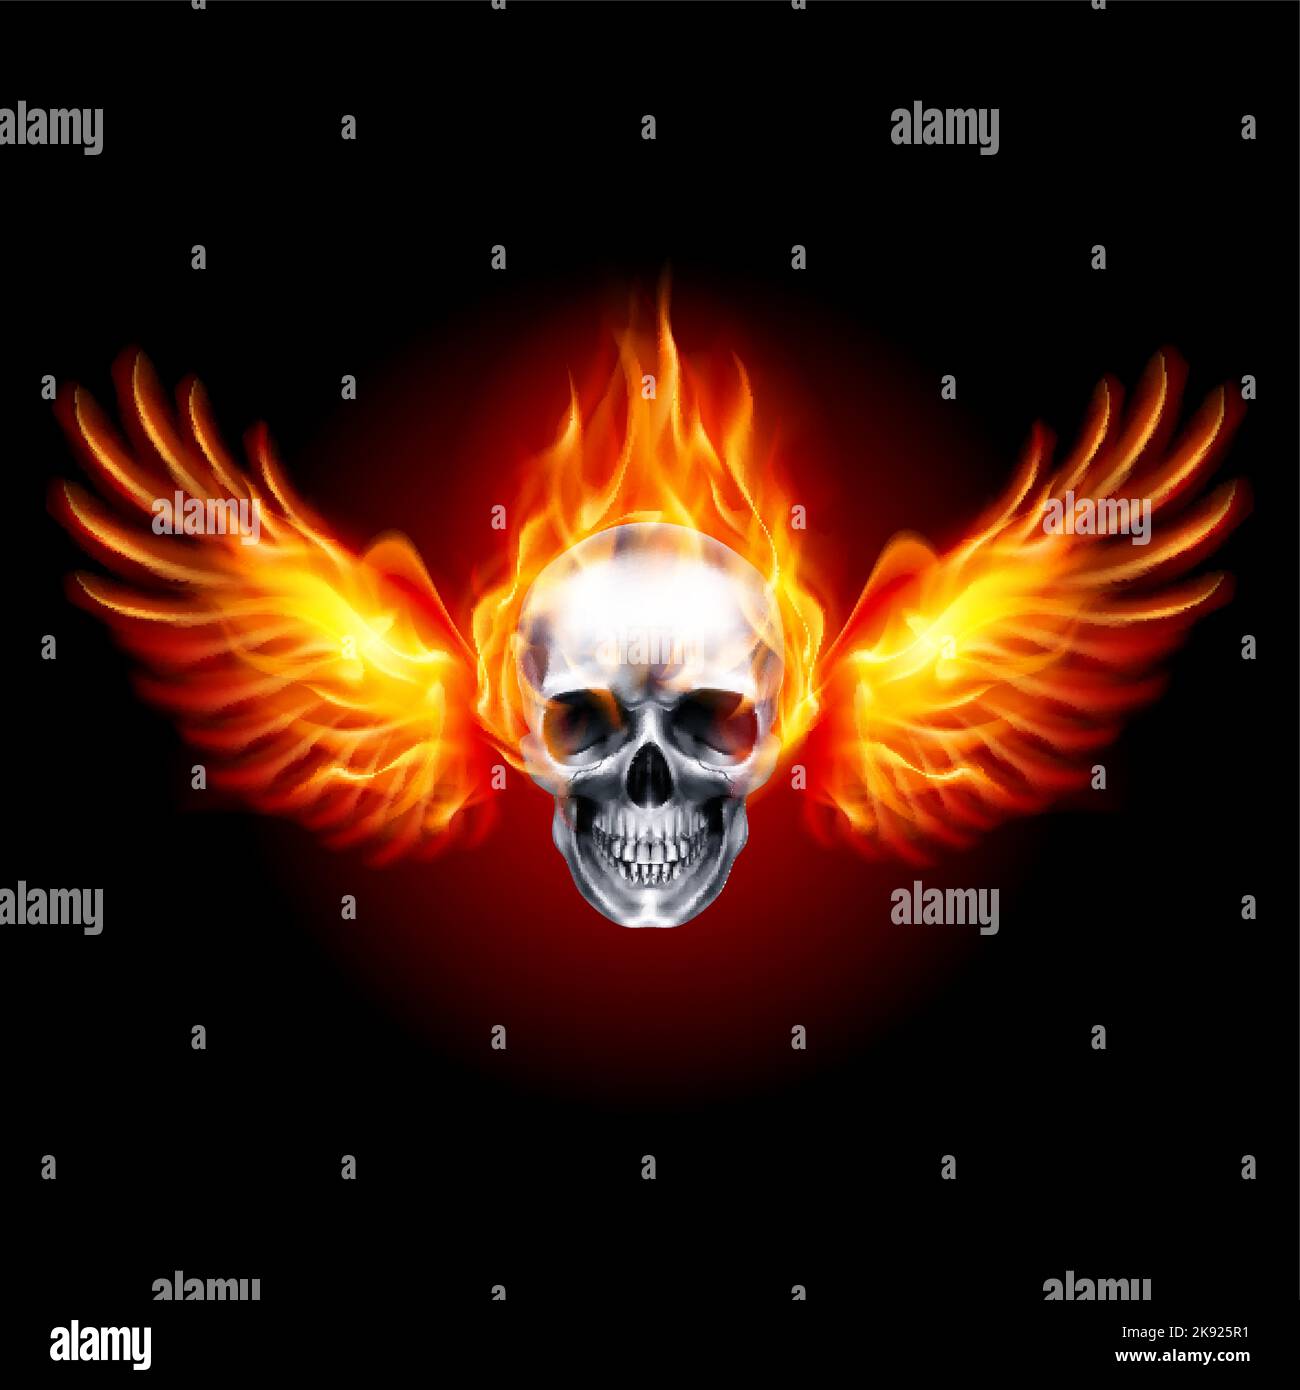 Illustration of Burning Skull Grim Reaper. Fiery Metall Skull with Fire Wings on Black Background Stock Vector